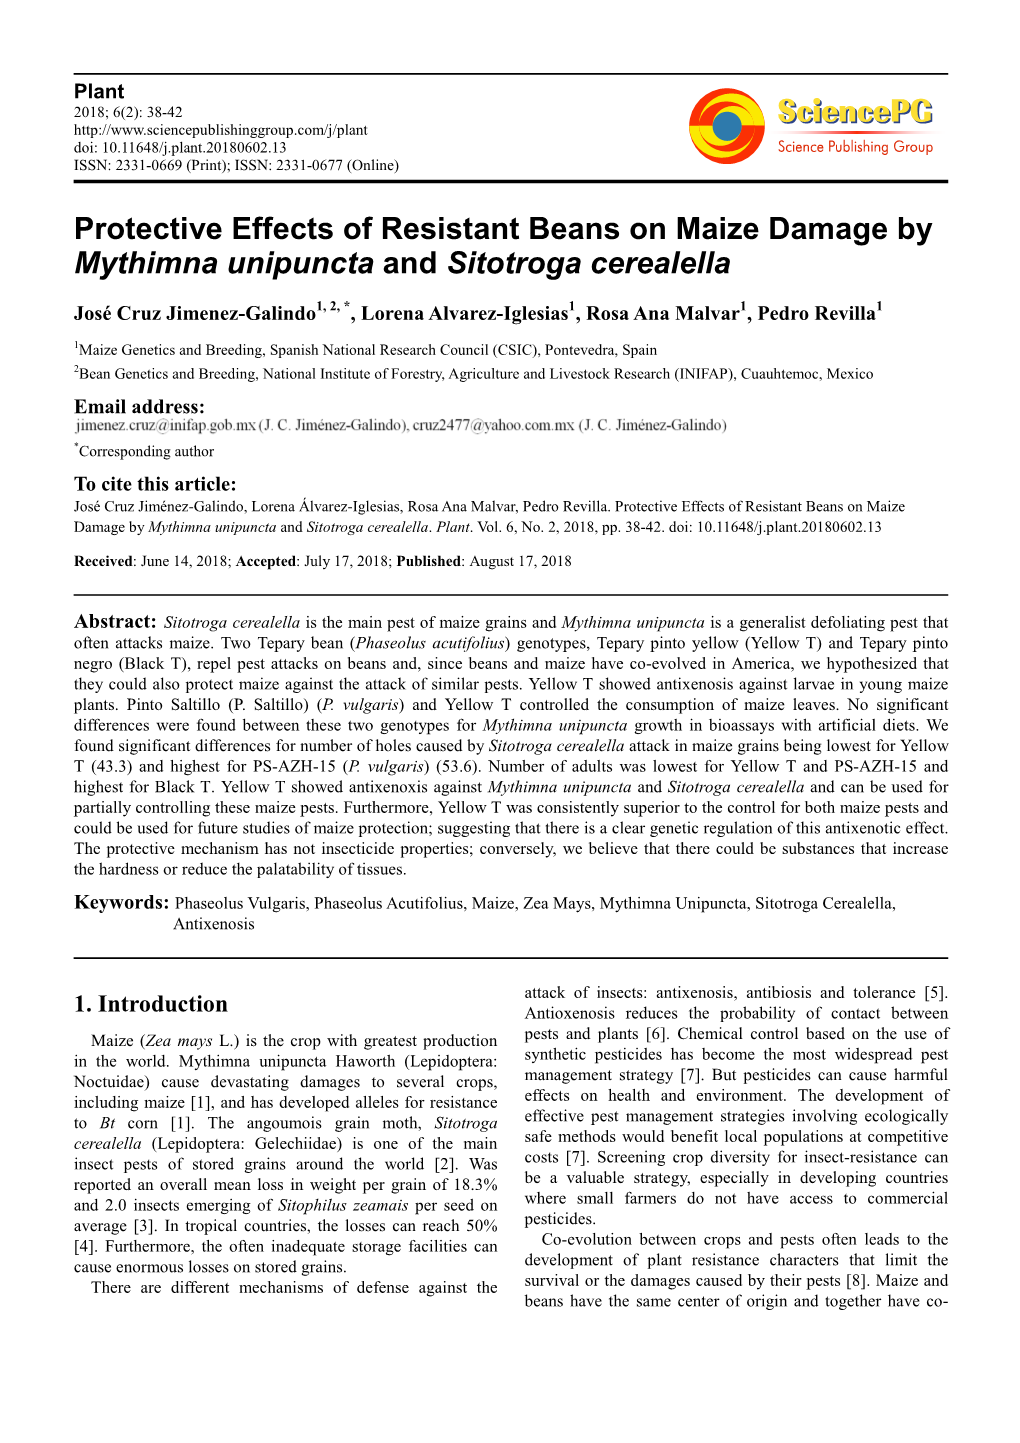 Protective Effects of Resistant Beans on Maize Damage by Mythimna Unipuncta and Sitotroga Cerealella